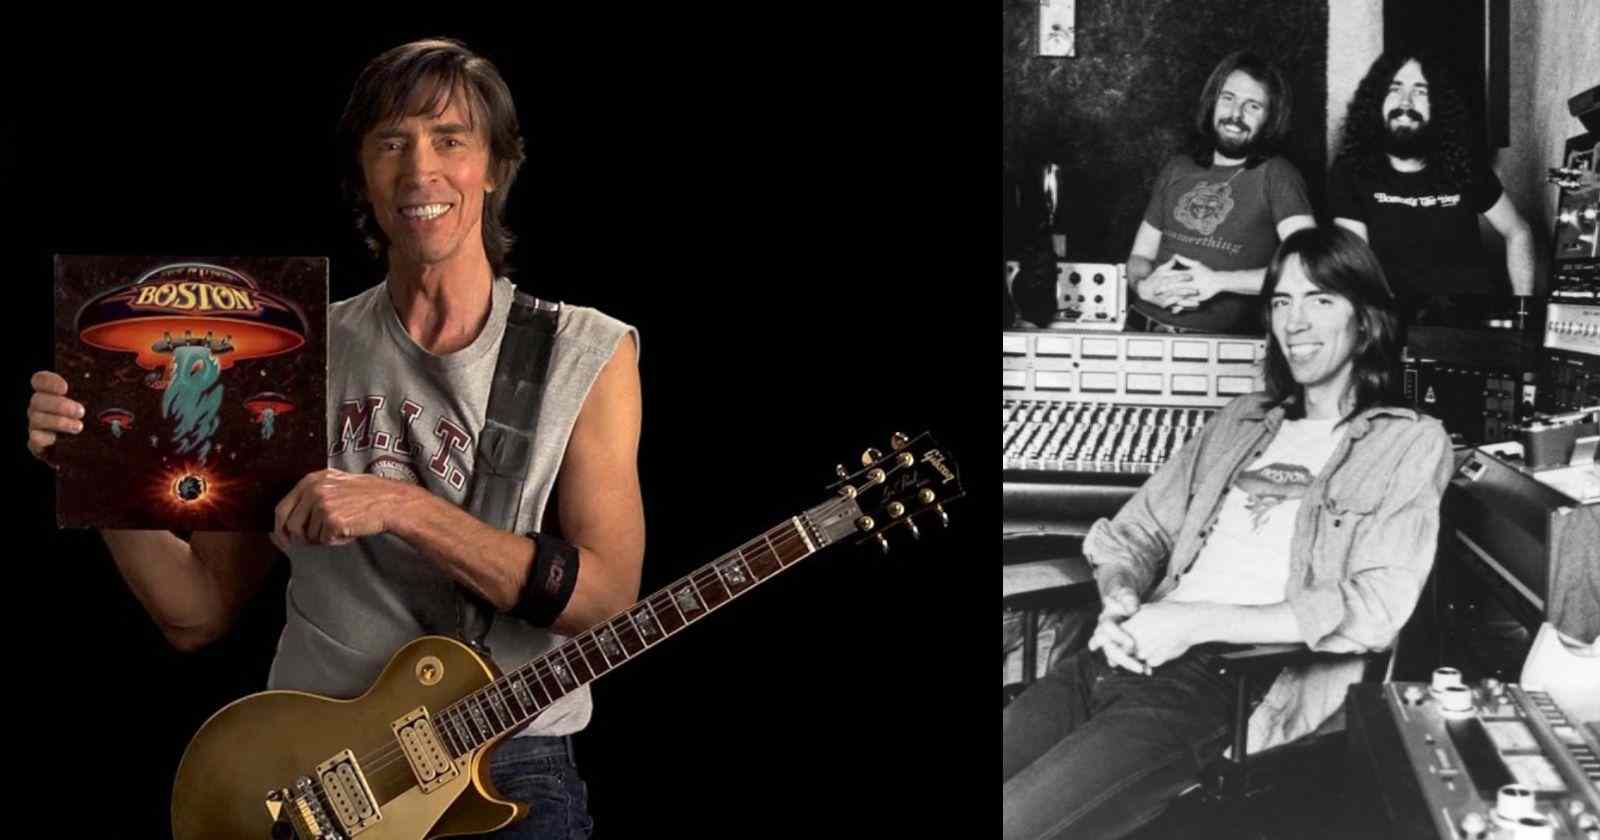 How Tom scholz band boston made debut album in basement